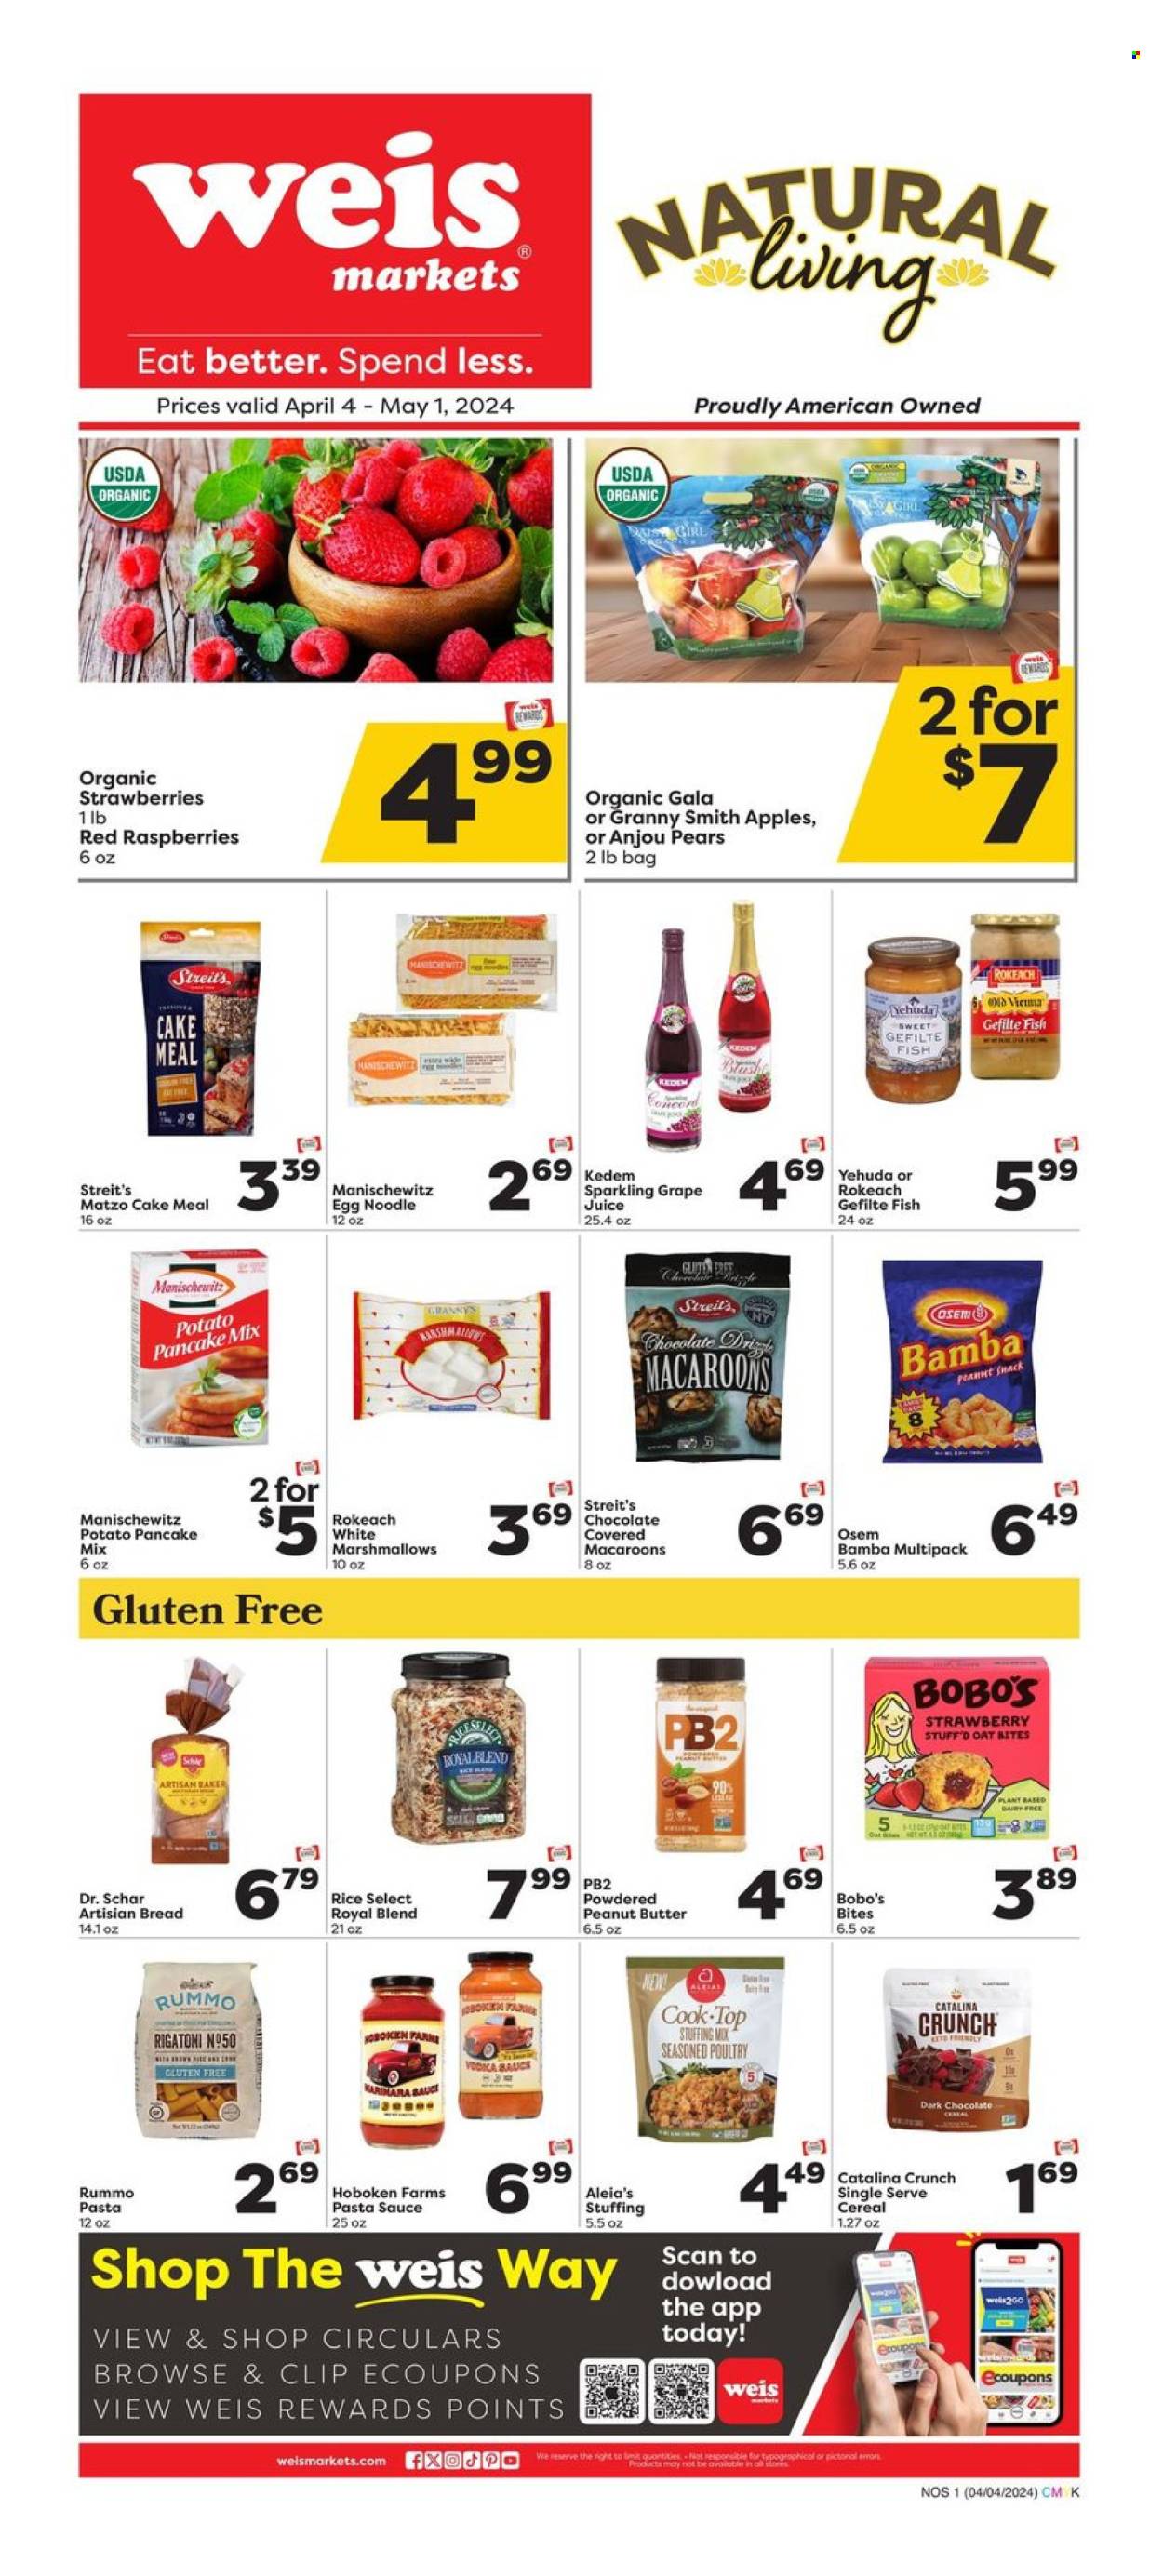 thumbnail - Weis Flyer - 04/04/2024 - 05/01/2024 - Sales products - bread, cake, pancake mix, apples, Gala, raspberries, strawberries, pears, Granny Smith, fish, pasta sauce, snack, noodles, ice cream, marshmallows, Bamba, peanut snack, stuffing mix, cereals, oat bites, rice, egg noodles, peanut butter, juice, Kedem, sauce. Page 1.